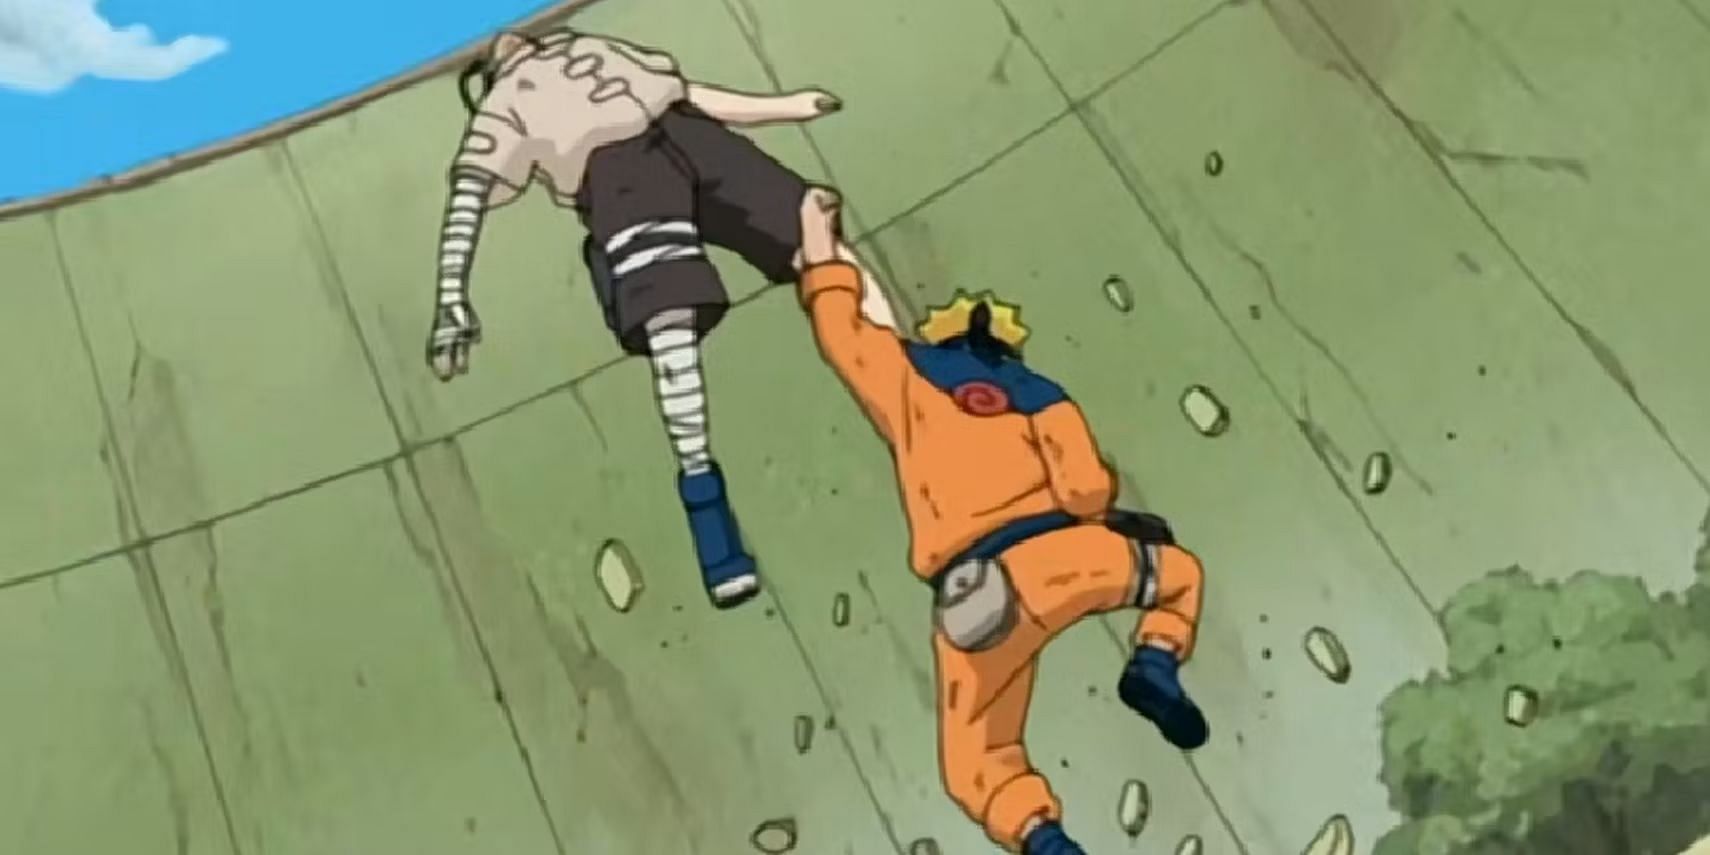 Naruto punching Neji was one of the most satisfying punches in anime(image via Studio Pierrot)